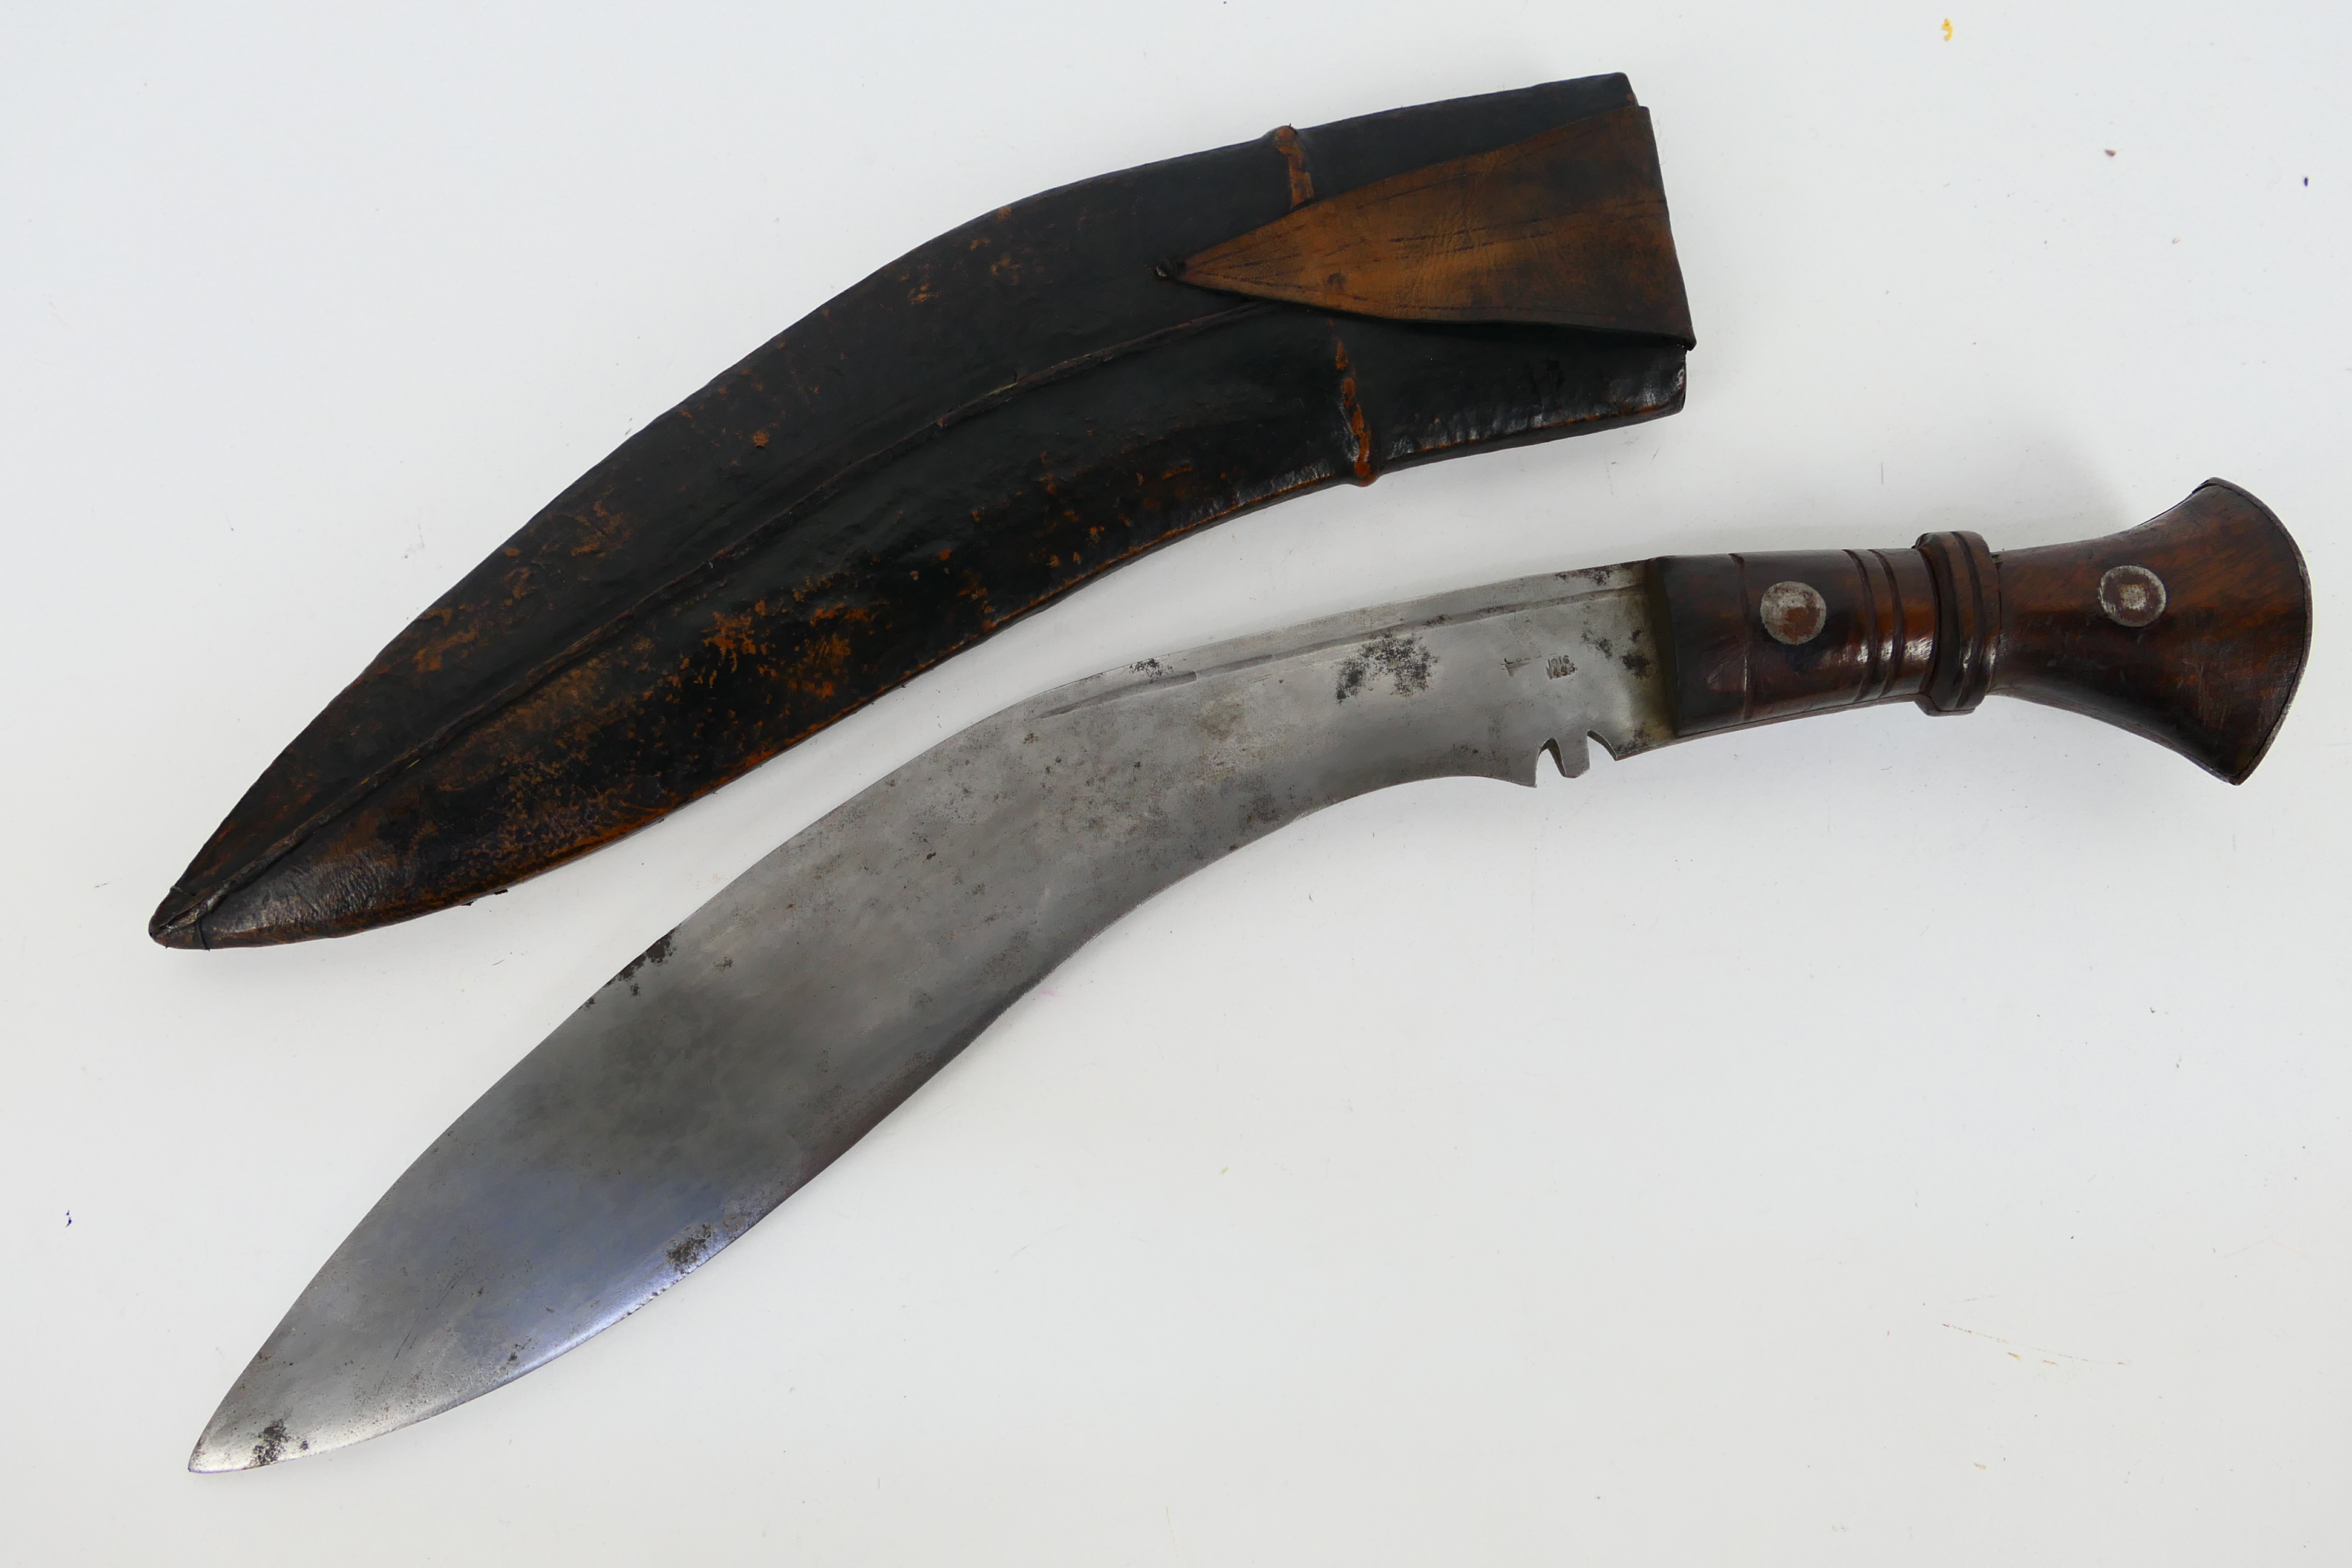 A Gurkha kukri knife, dated 1916, turned wooden hilt with metal pommel, housed in leather sheath.